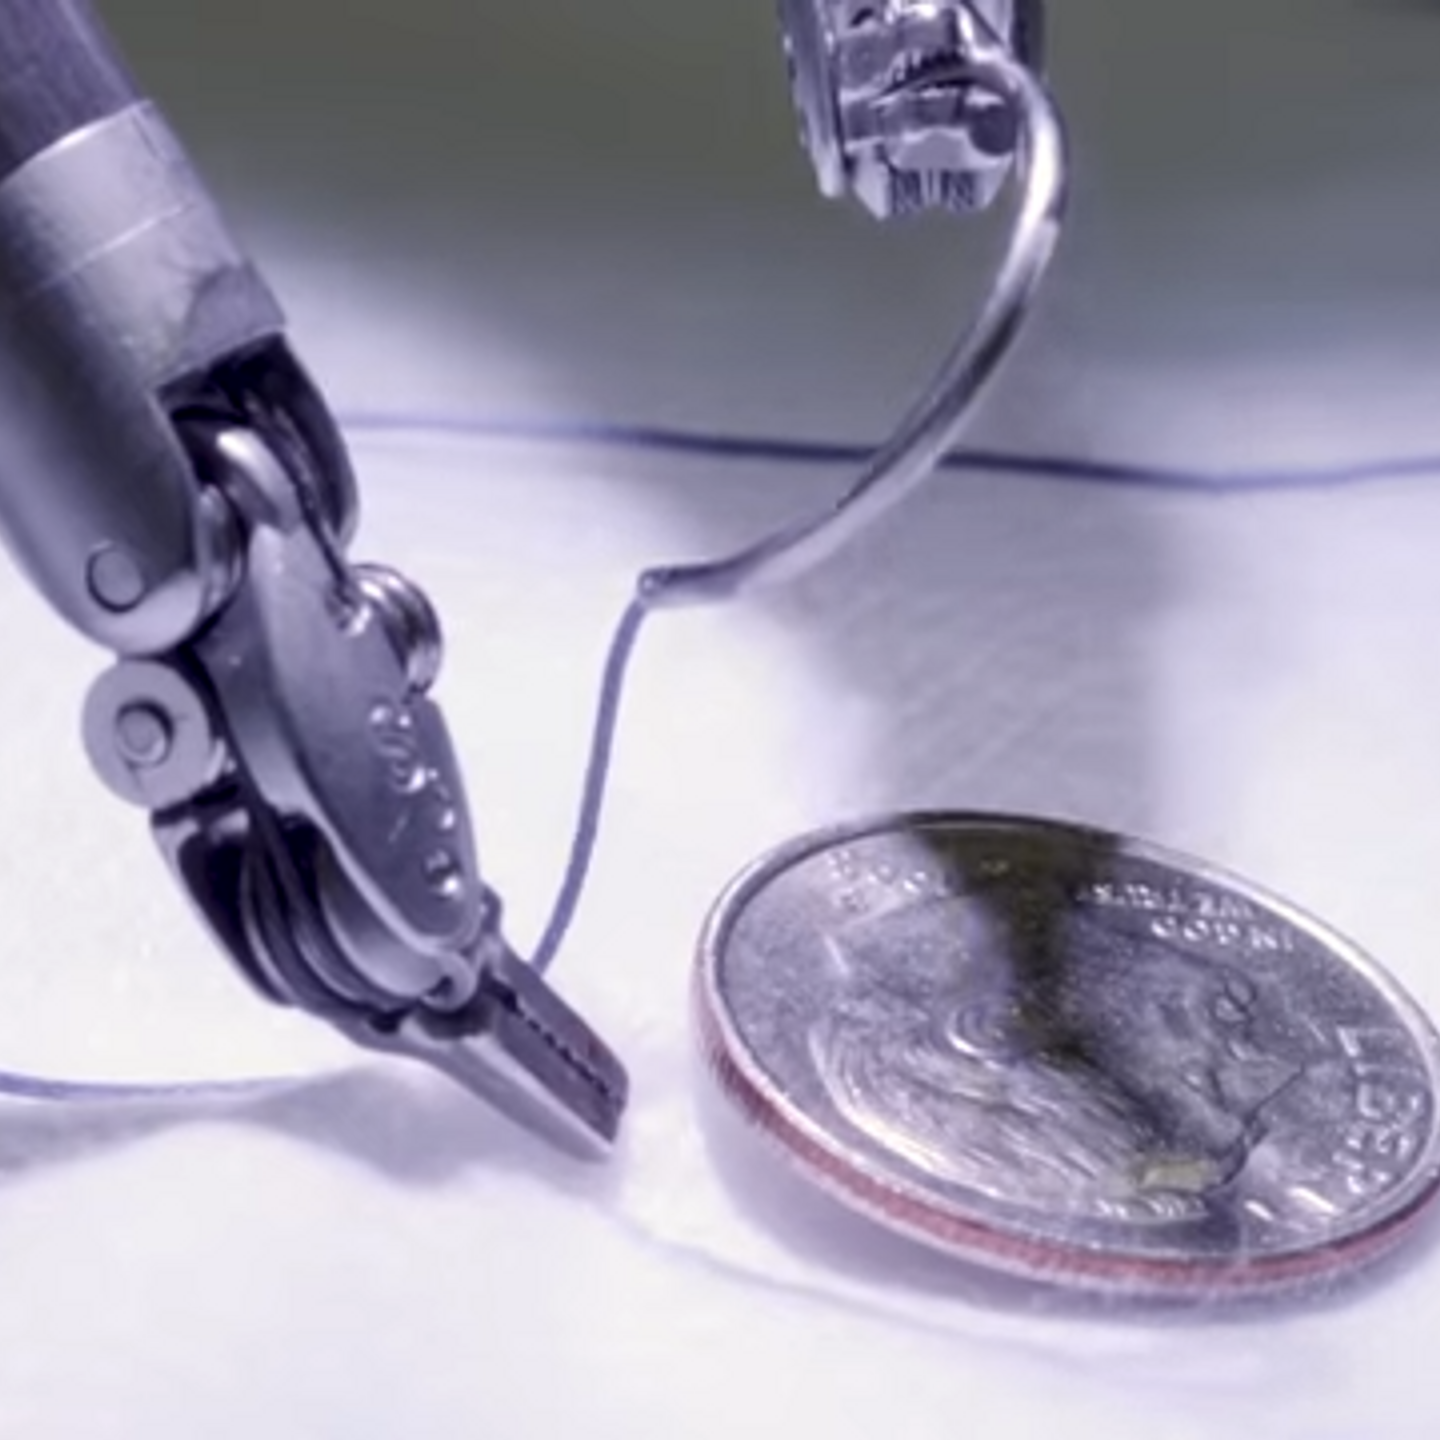 A robotic device sows thread through cloth. A dime is pictured for scale.